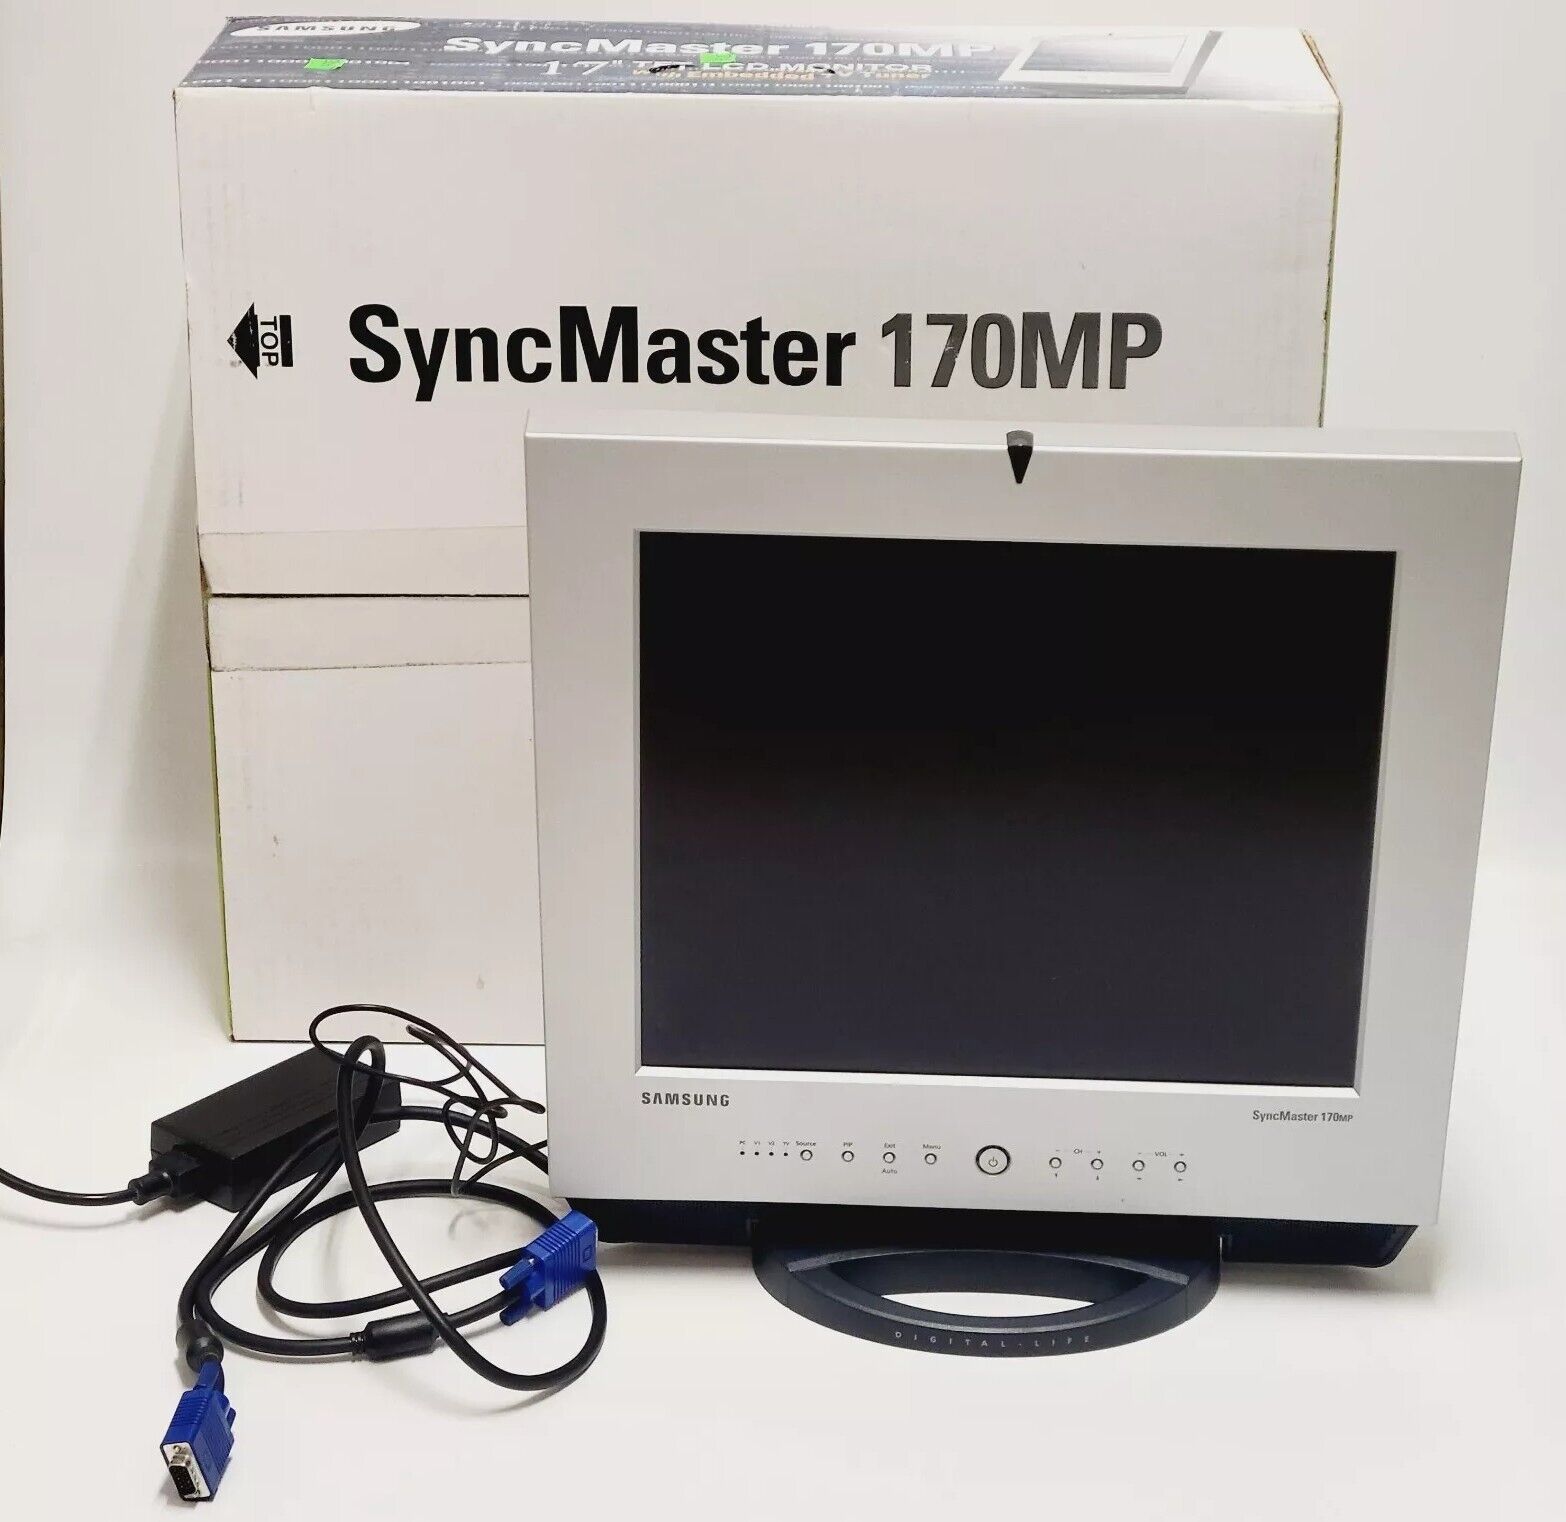 Samsung SyncMaster 170MP LCD Monitor with TV Tuner Retro Gaming Computer Display